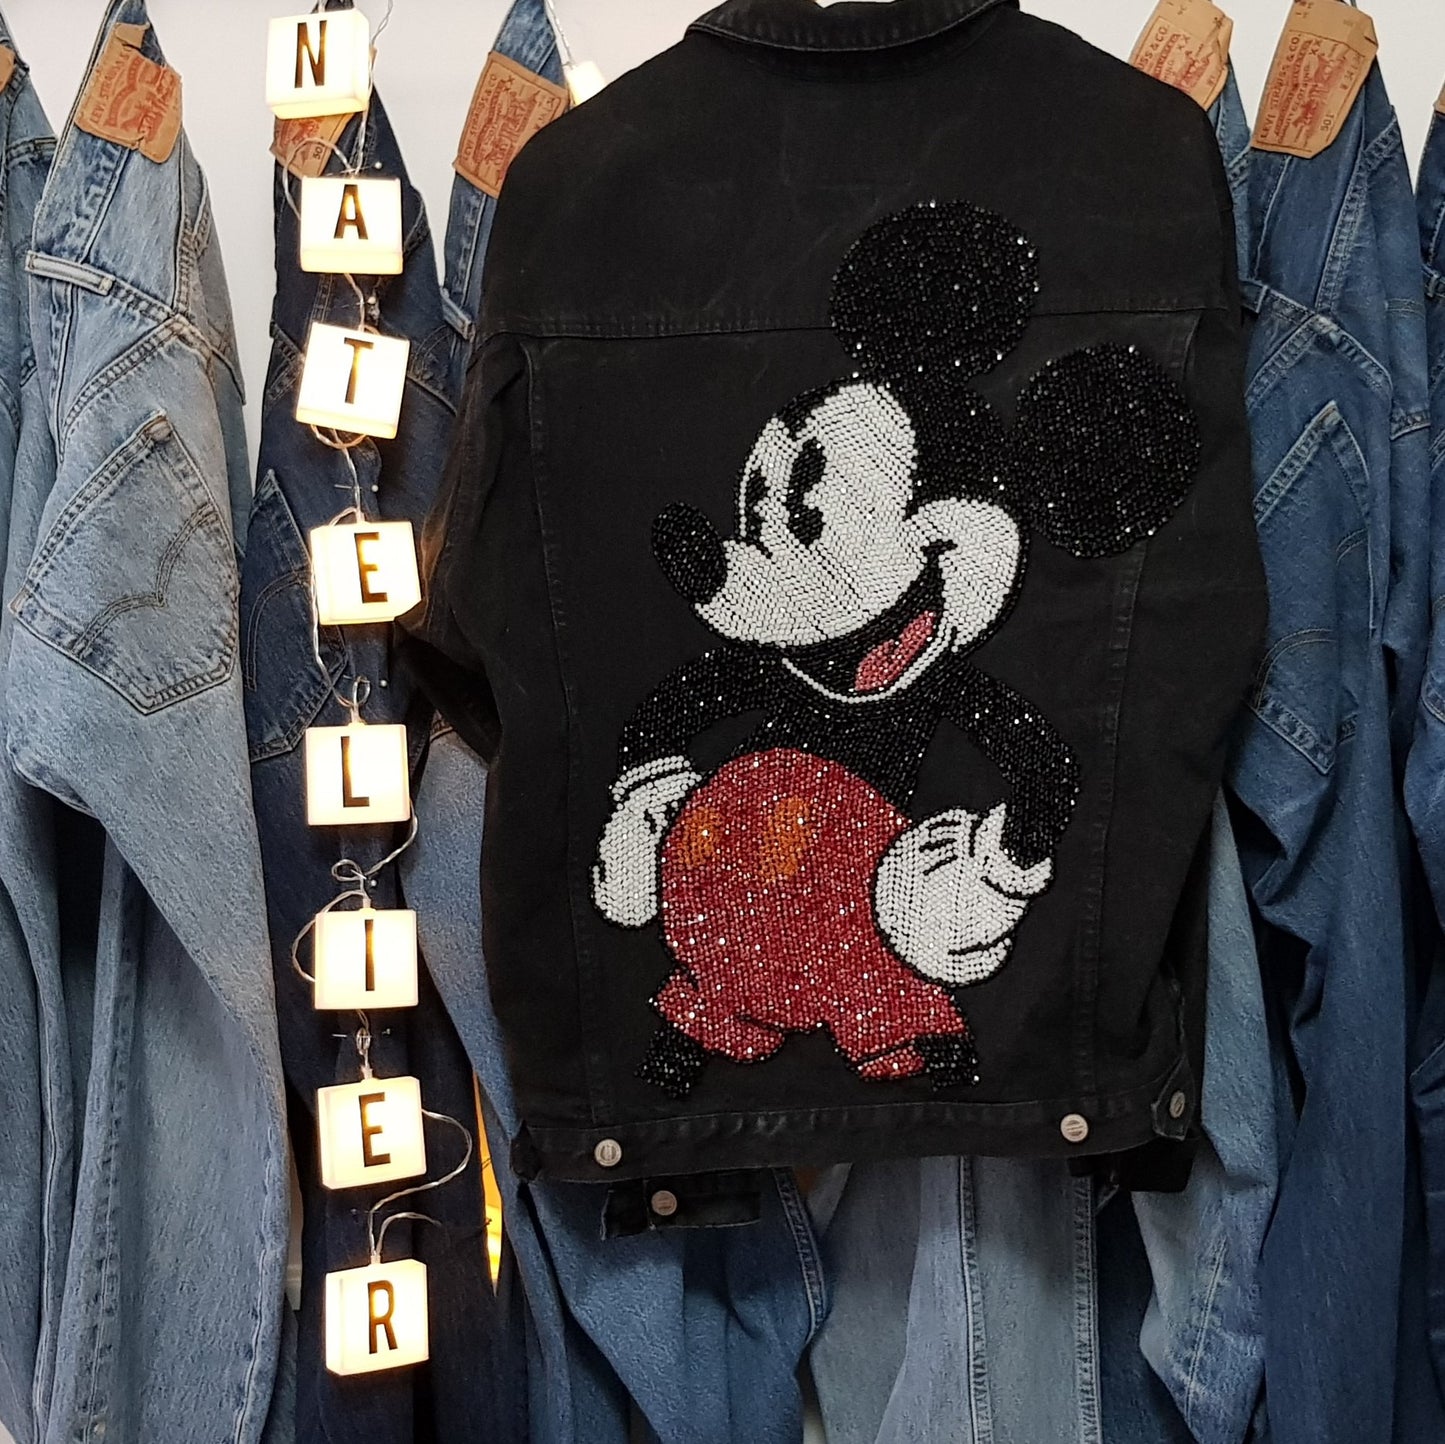 Customized pearls and crystals embroidery on personal jacket